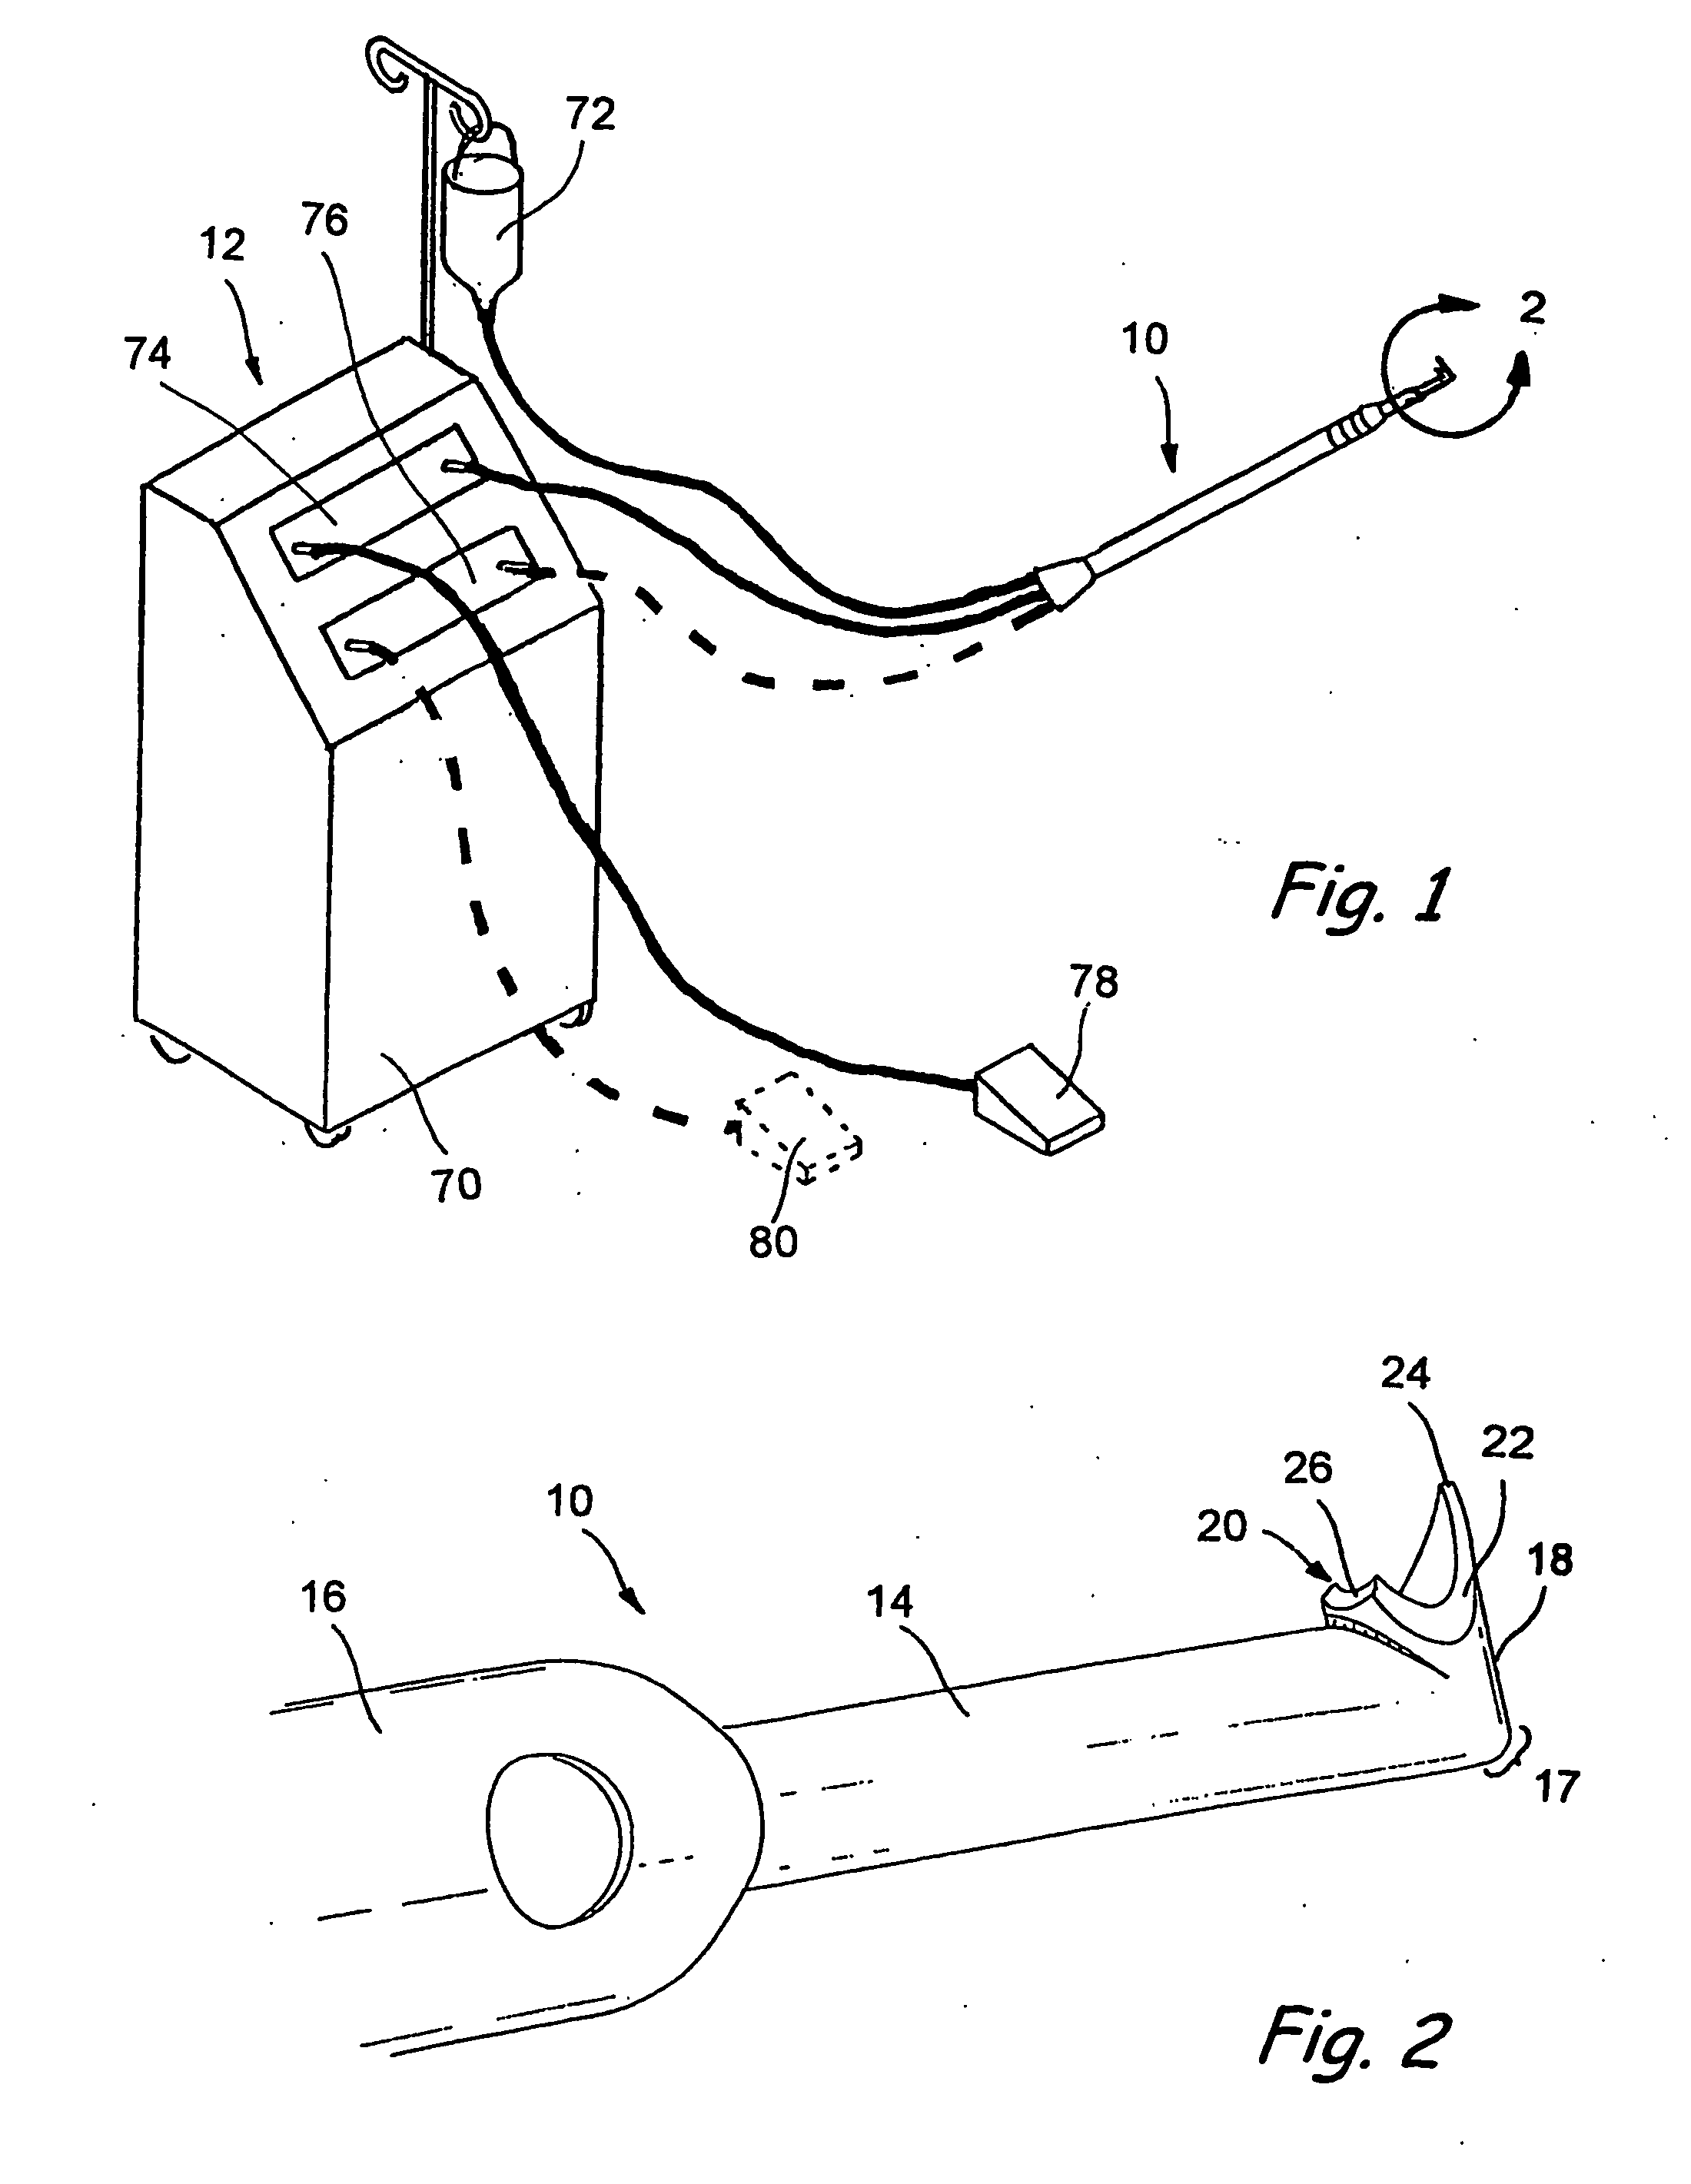 Tubular Cutter Device And Methods For Cutting And Removing Strips Of Tissue From The Body Of A Patient